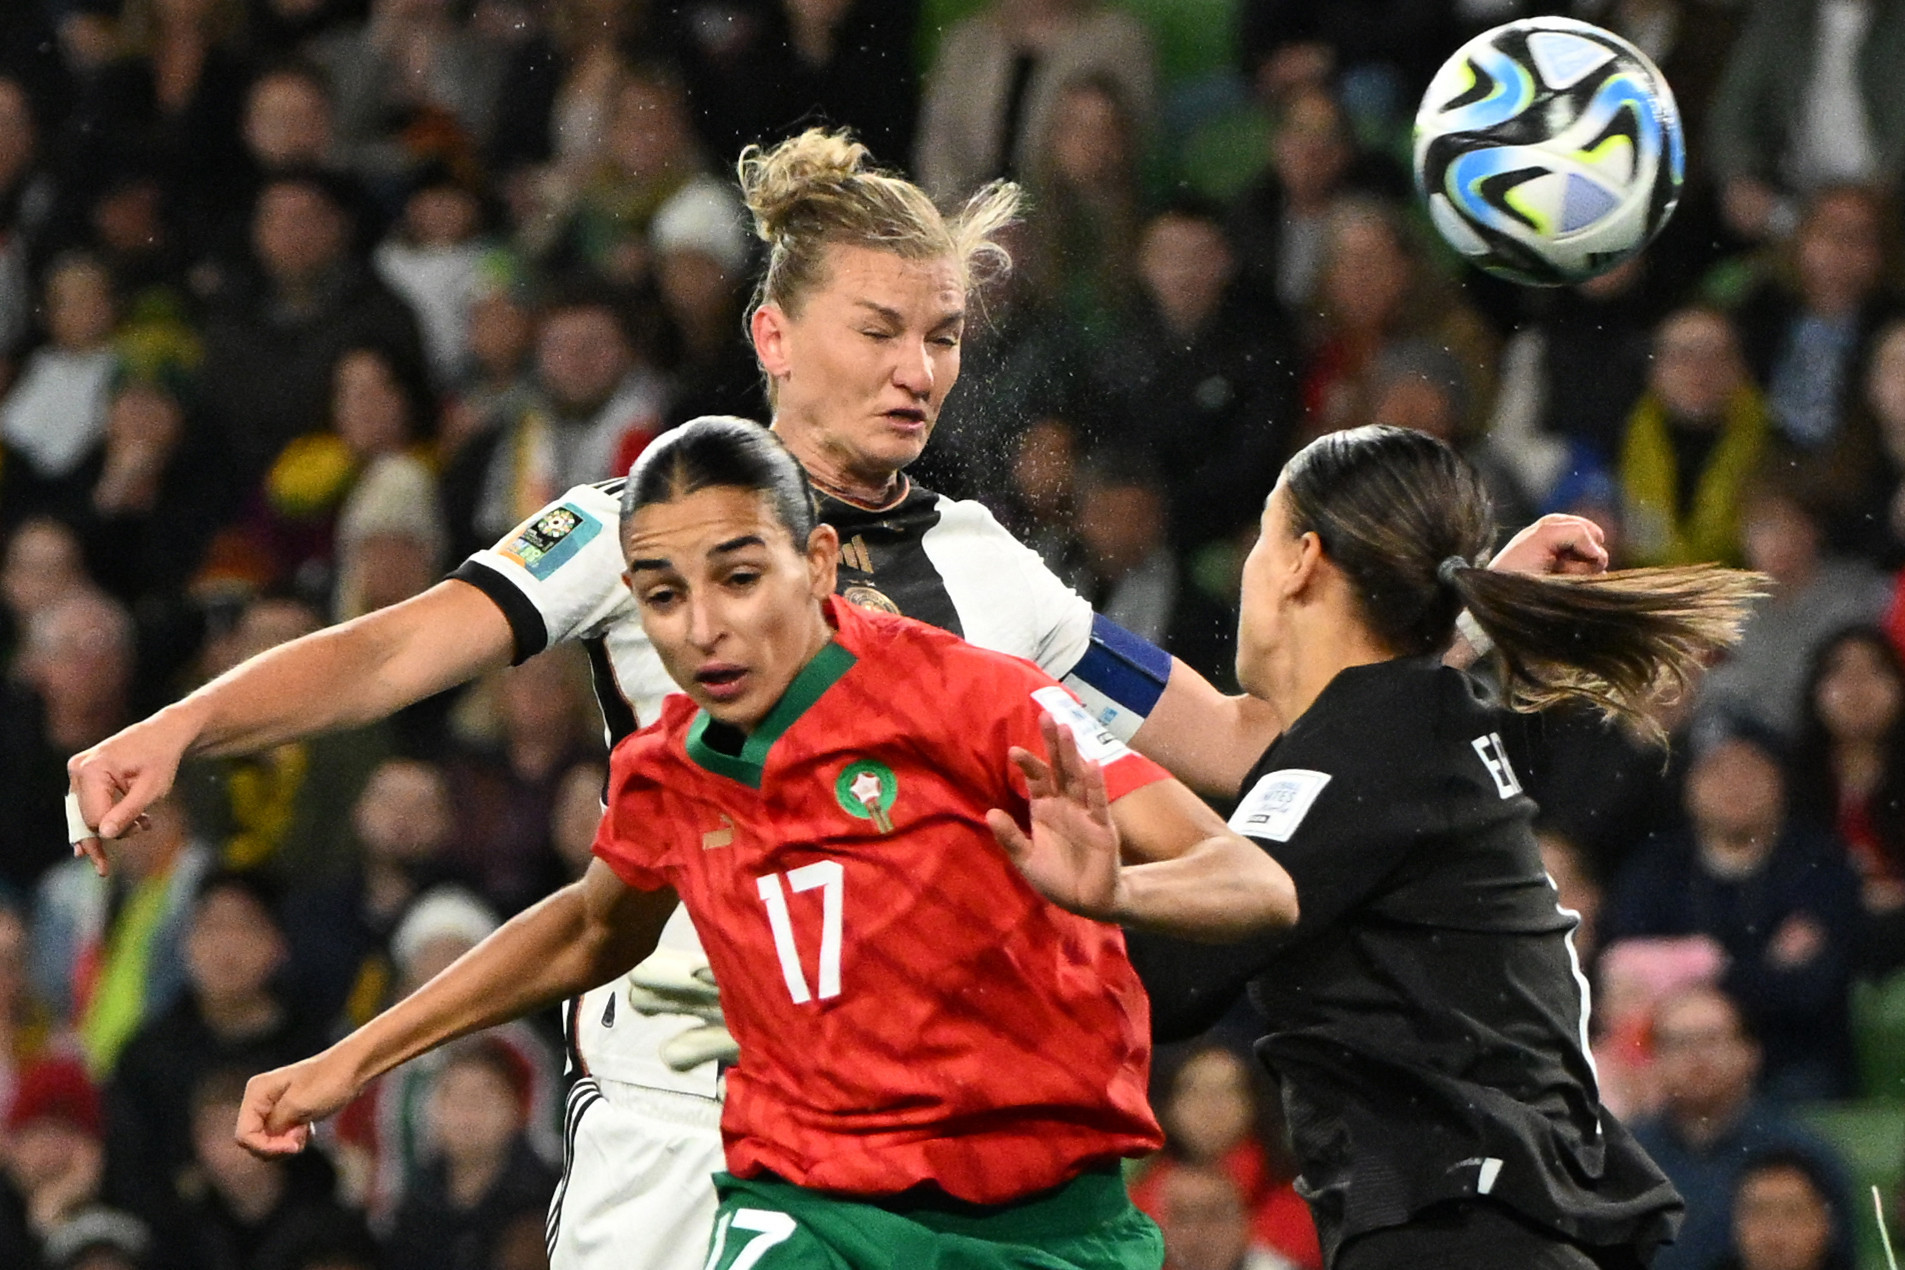 Brazilian Borges bags first hat-trick of FIFA Women's World Cup